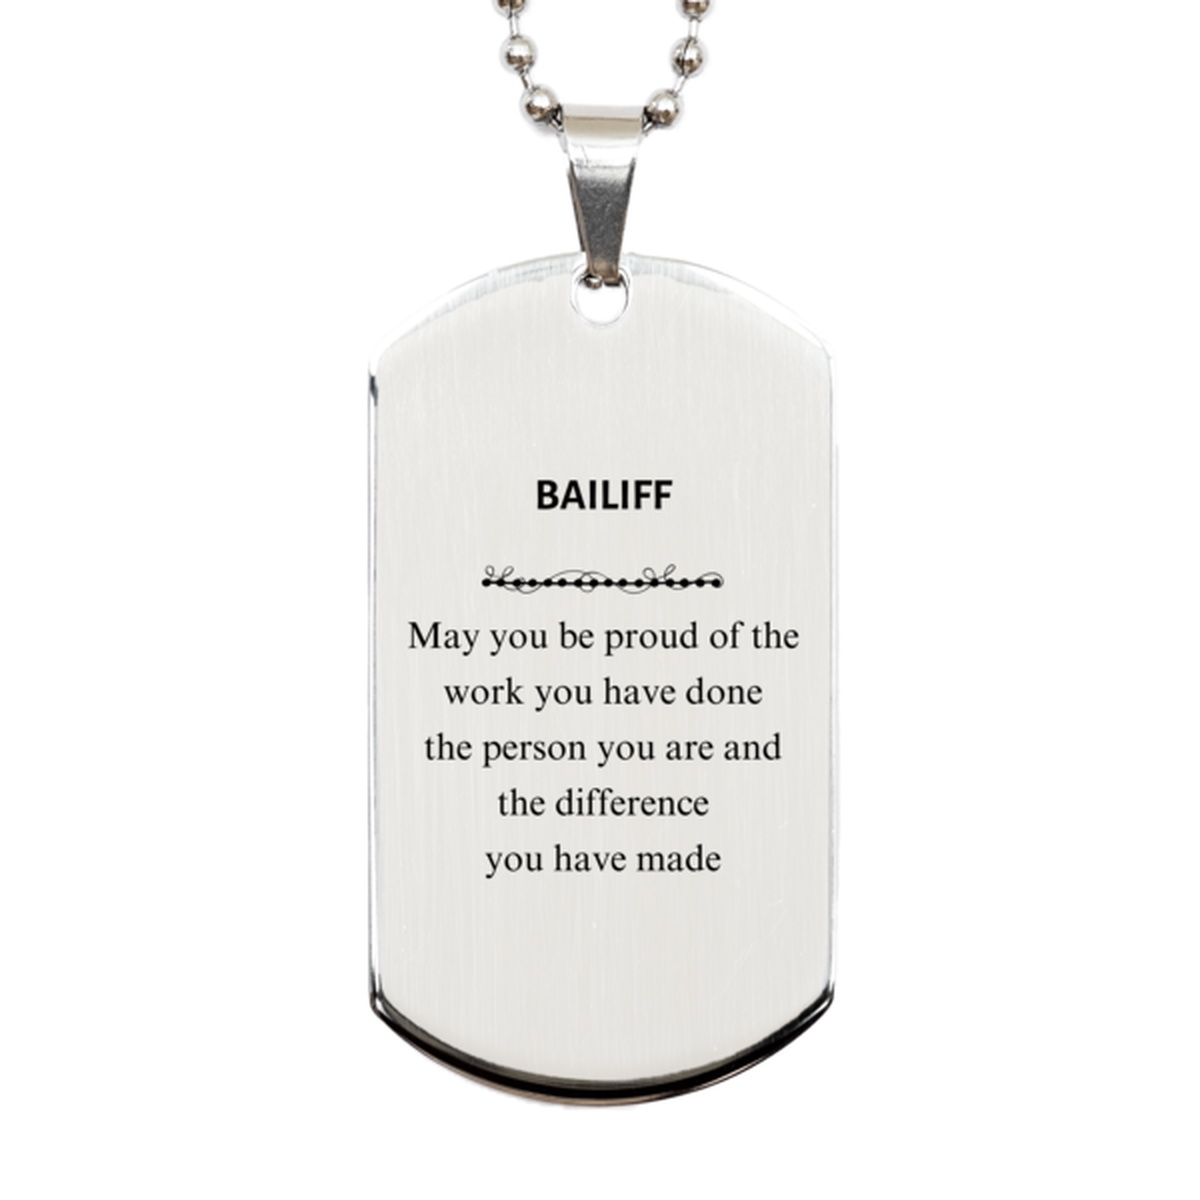 Bailiff May you be proud of the work you have done, Retirement Bailiff Silver Dog Tag for Colleague Appreciation Gifts Amazing for Bailiff